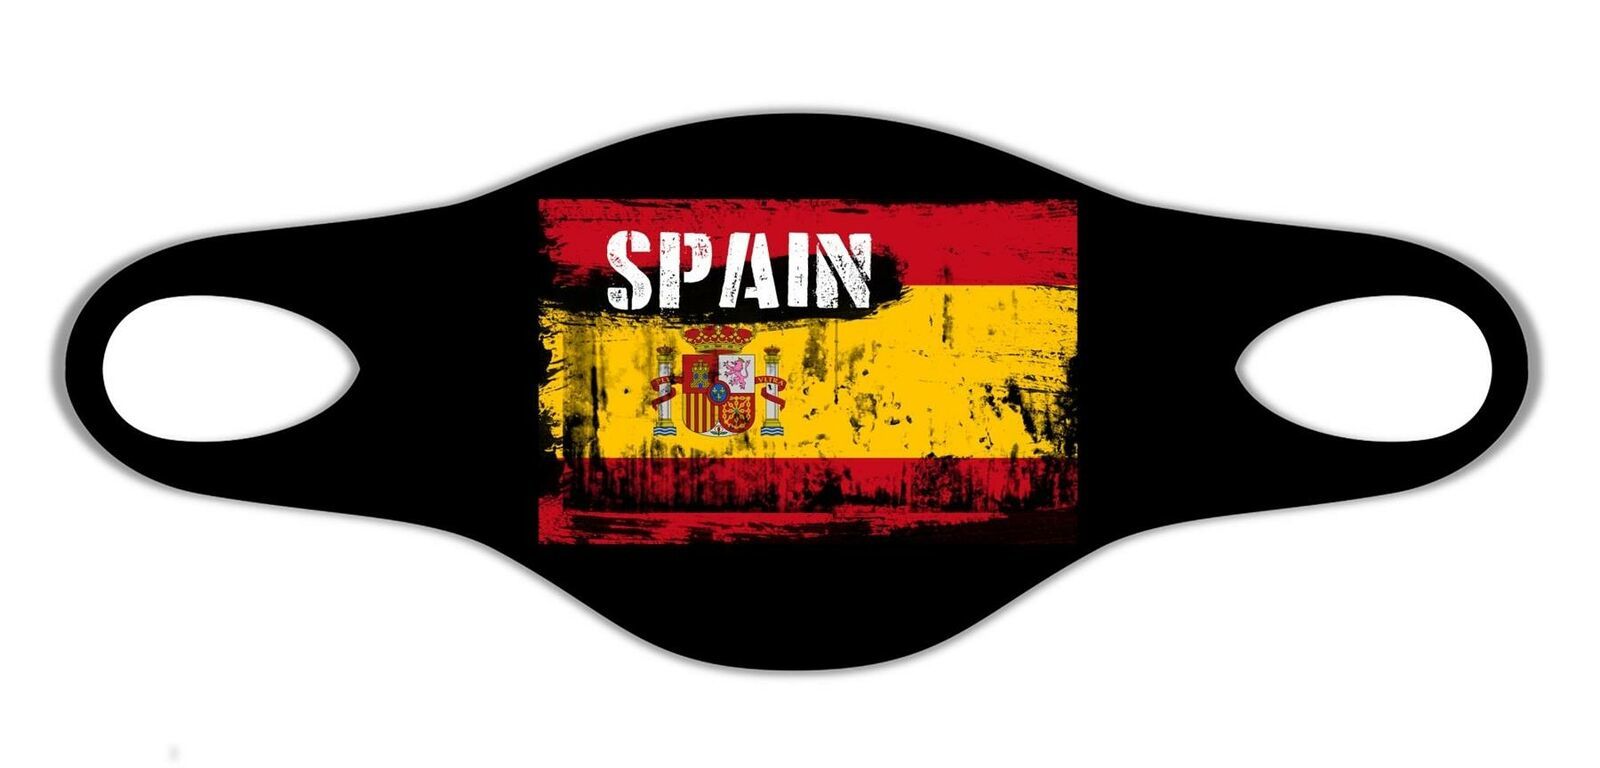 Spain National Flag Face Mask Protective Washable Reusable Unisex Breathable